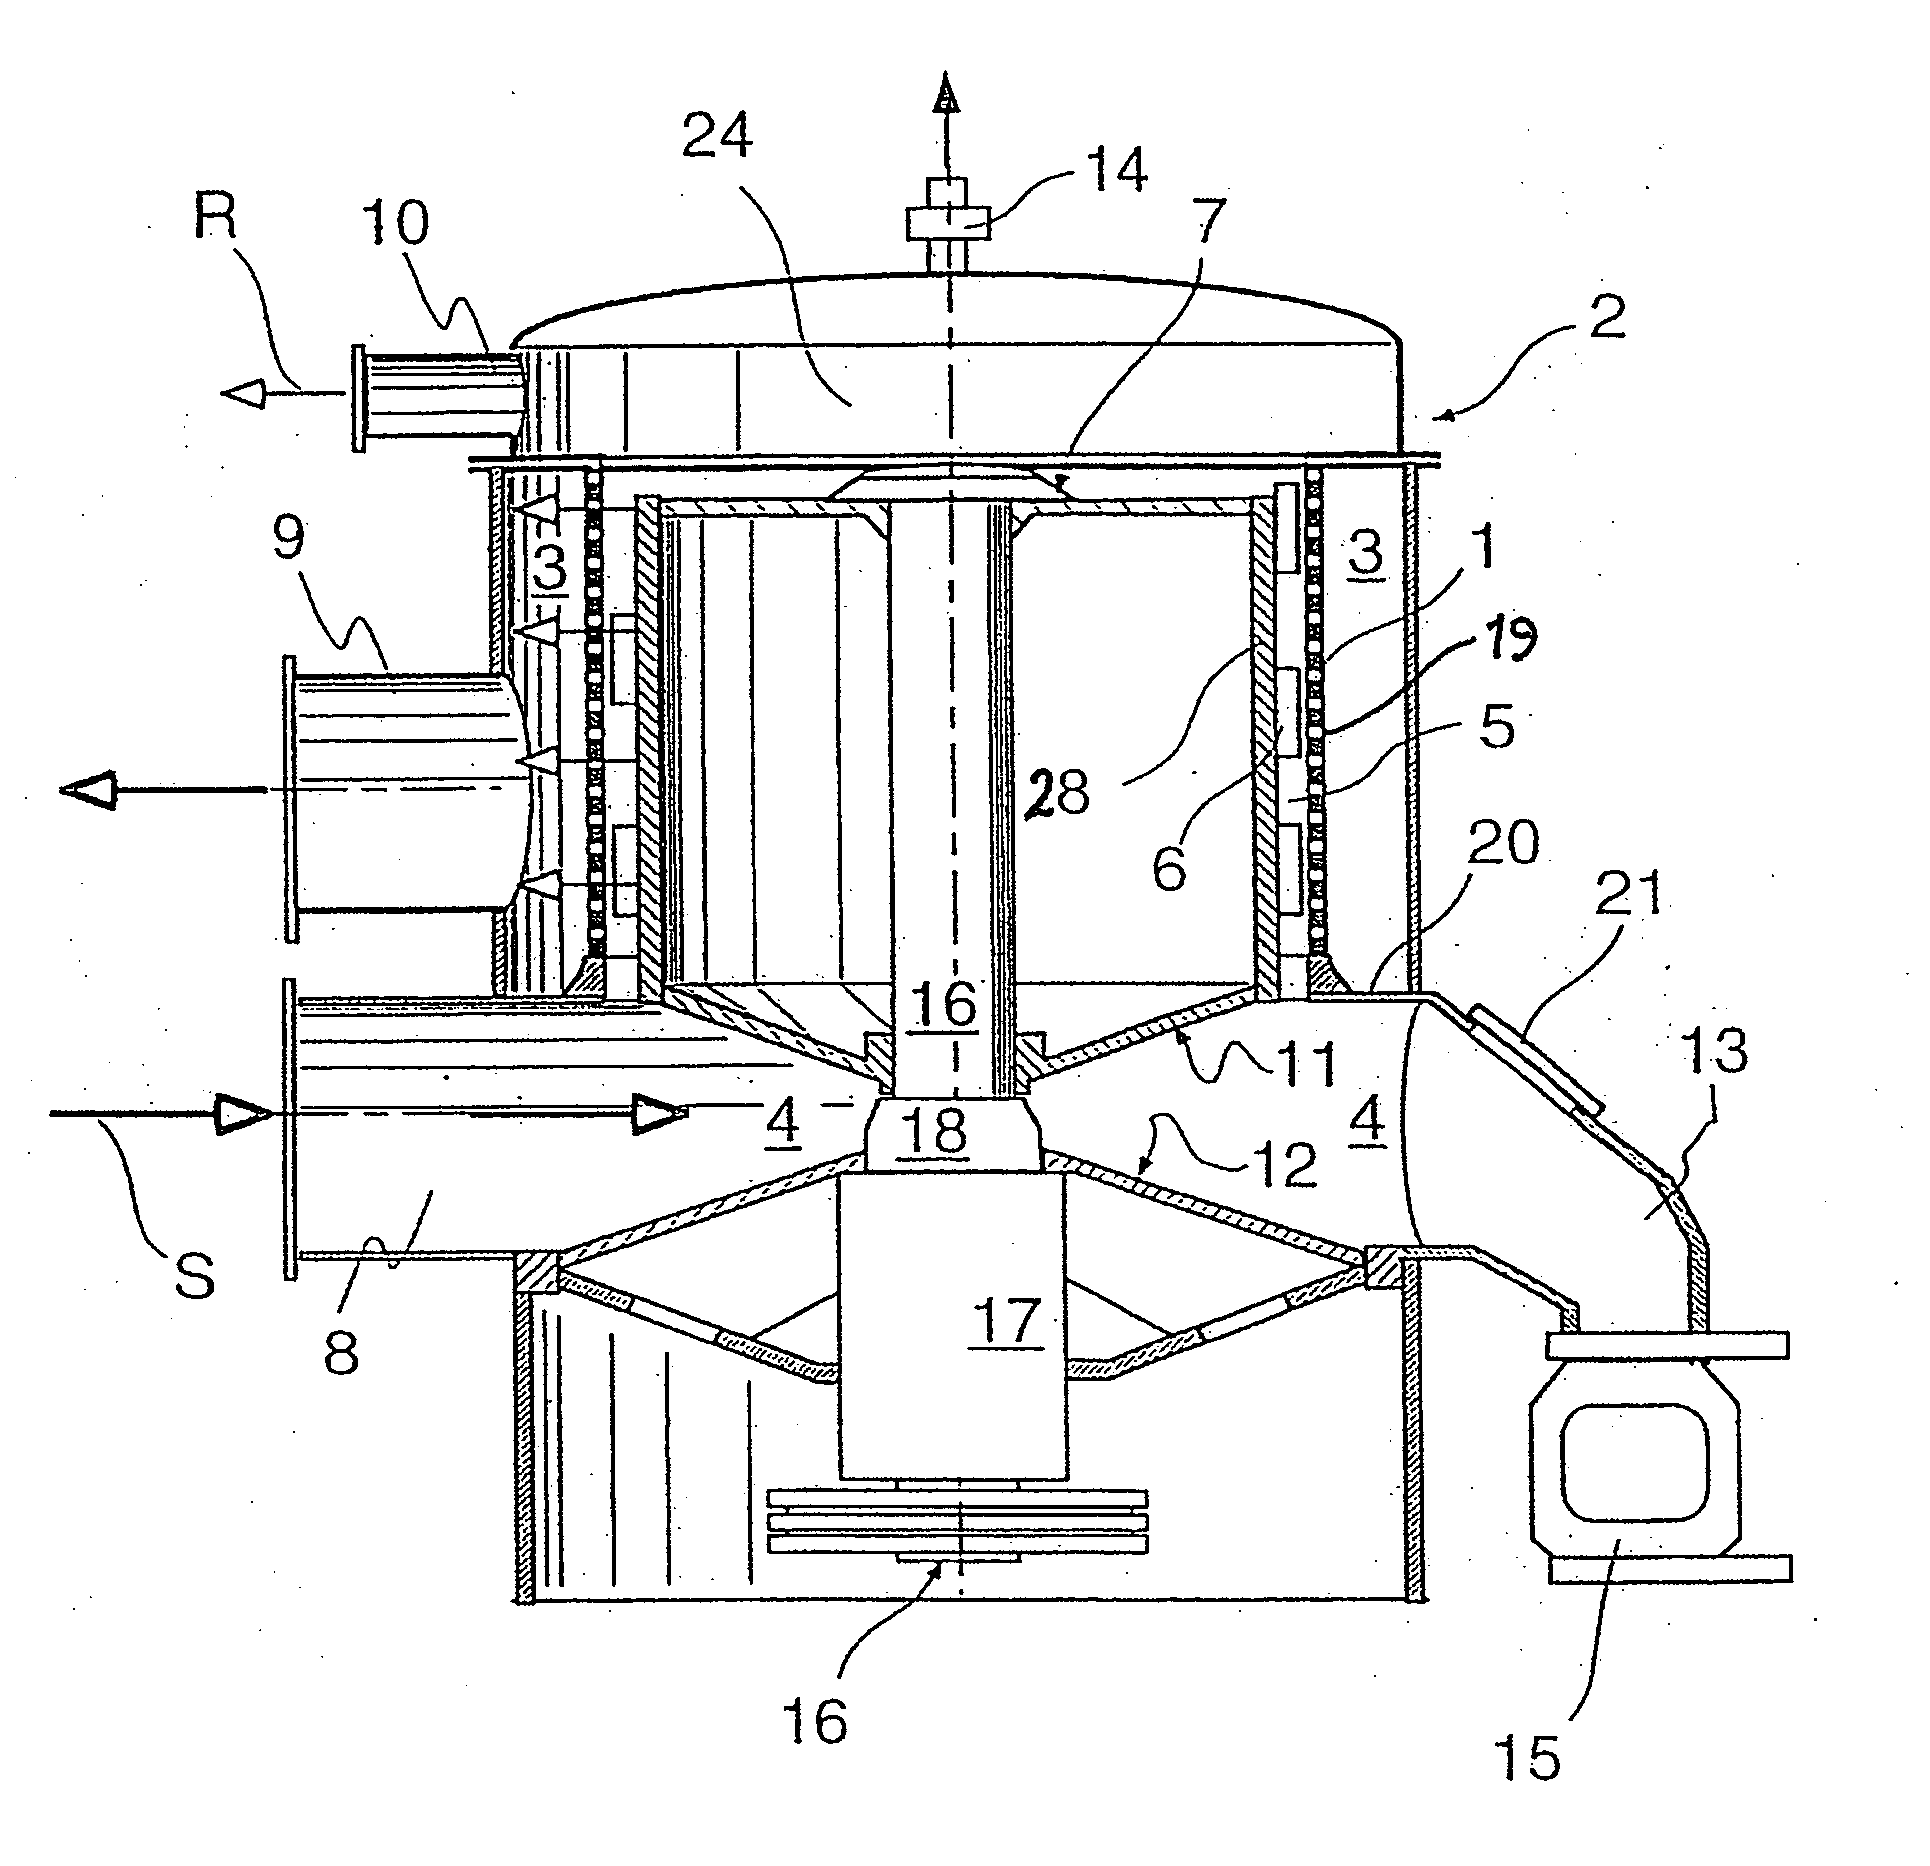 Pressurized screen for screening a fibrous suspension